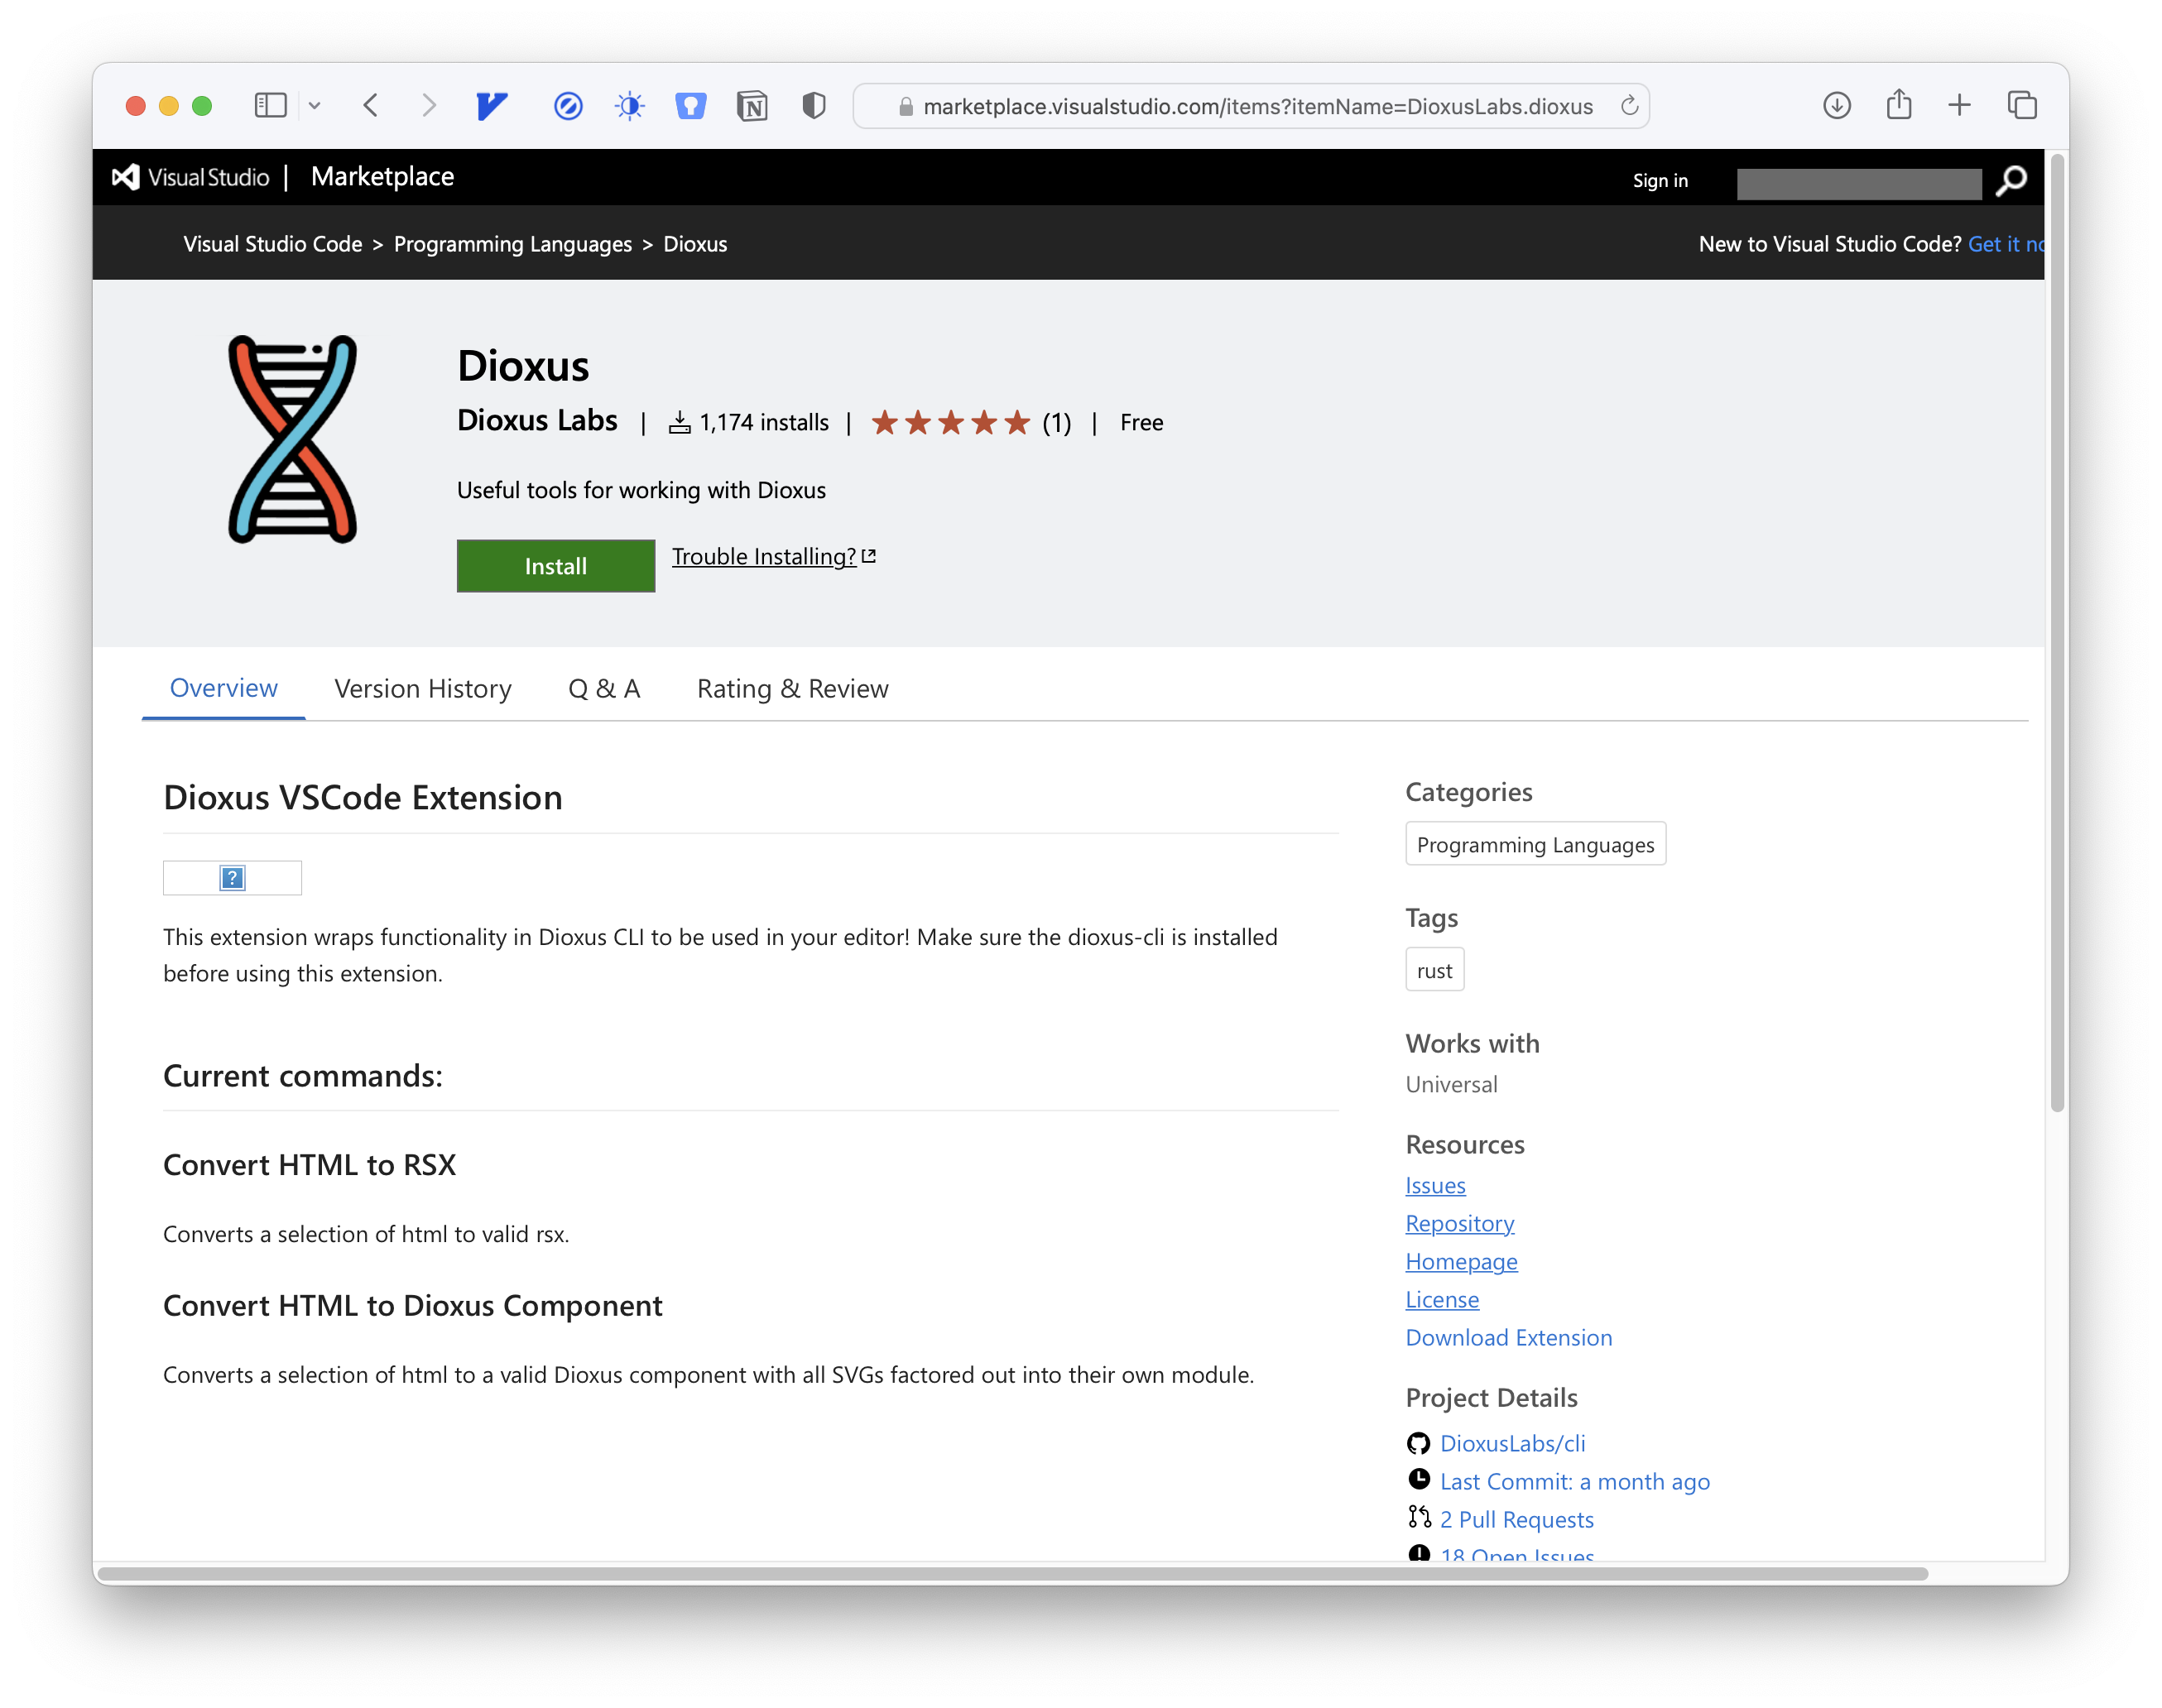 The Dioxus VSCode extension page